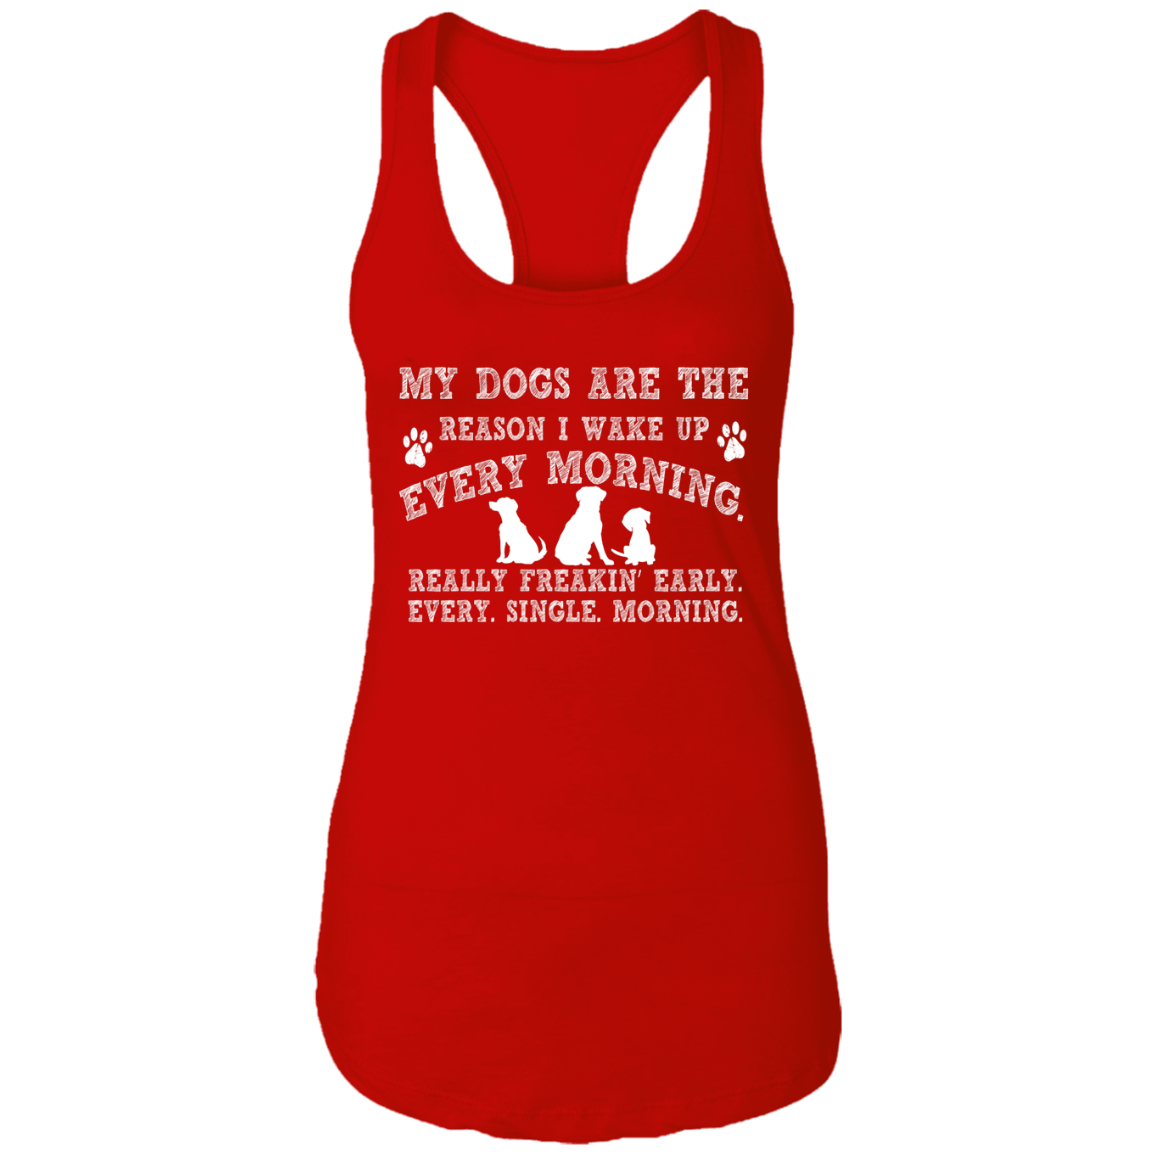 My Dogs Are The Reason - Ladies Racer Back Tank.